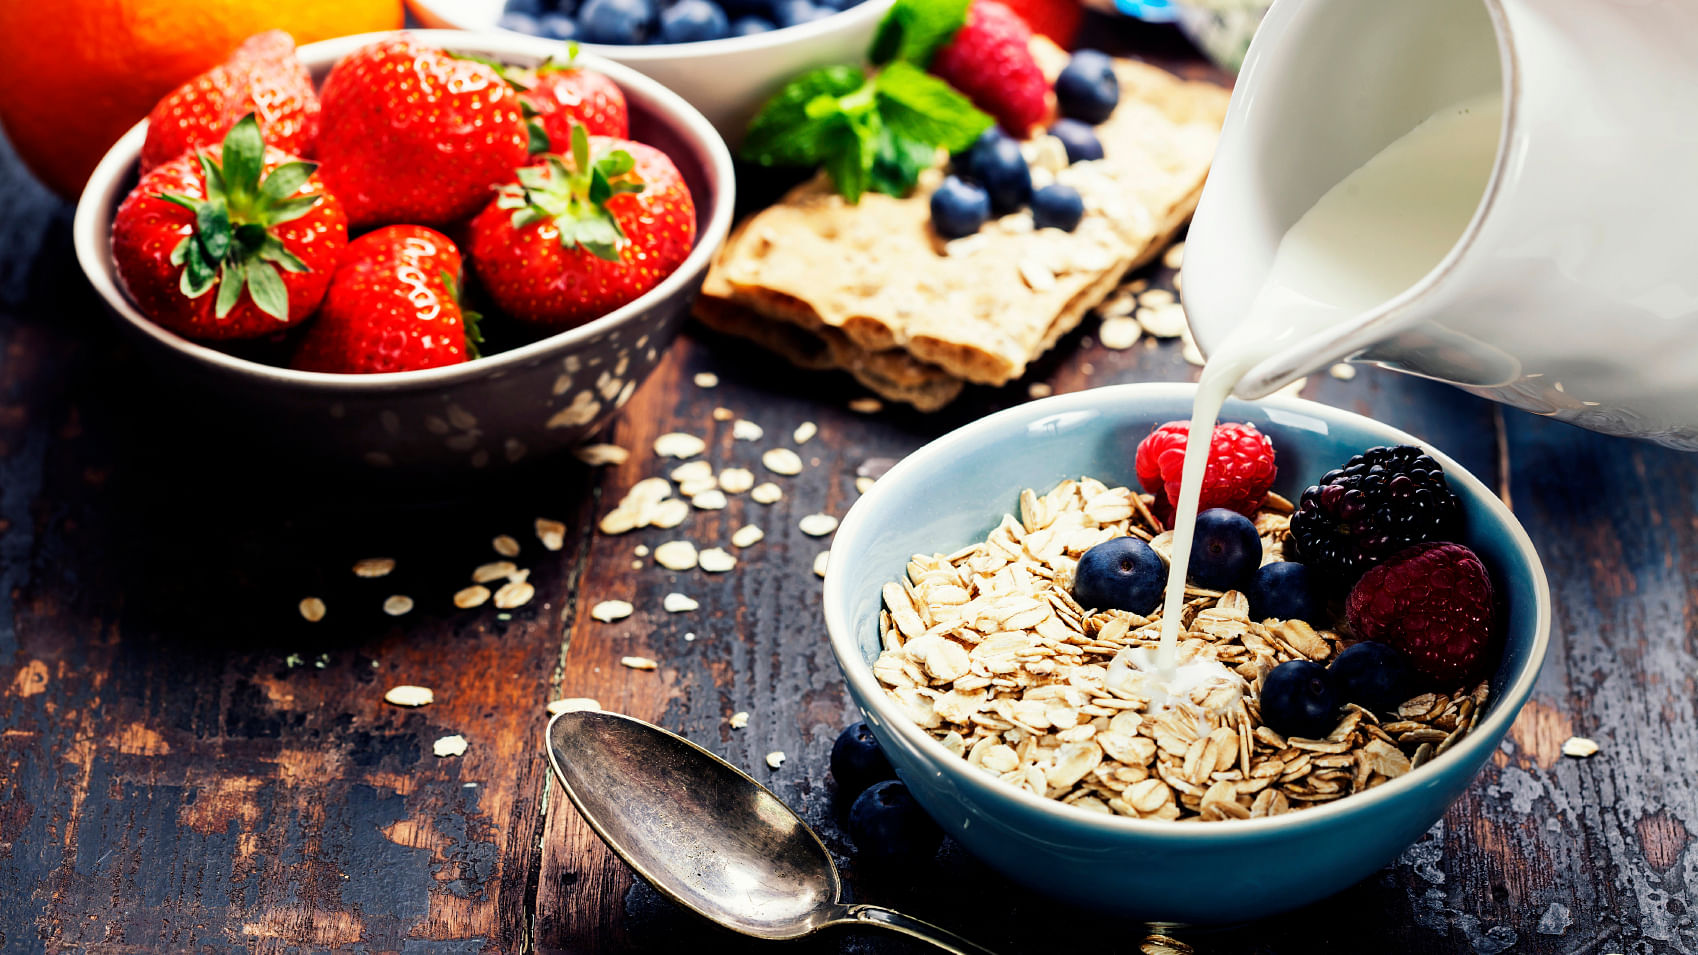 Skipping breakfast occasionally might be associated with a higher risk of developing type 2 diabetes.